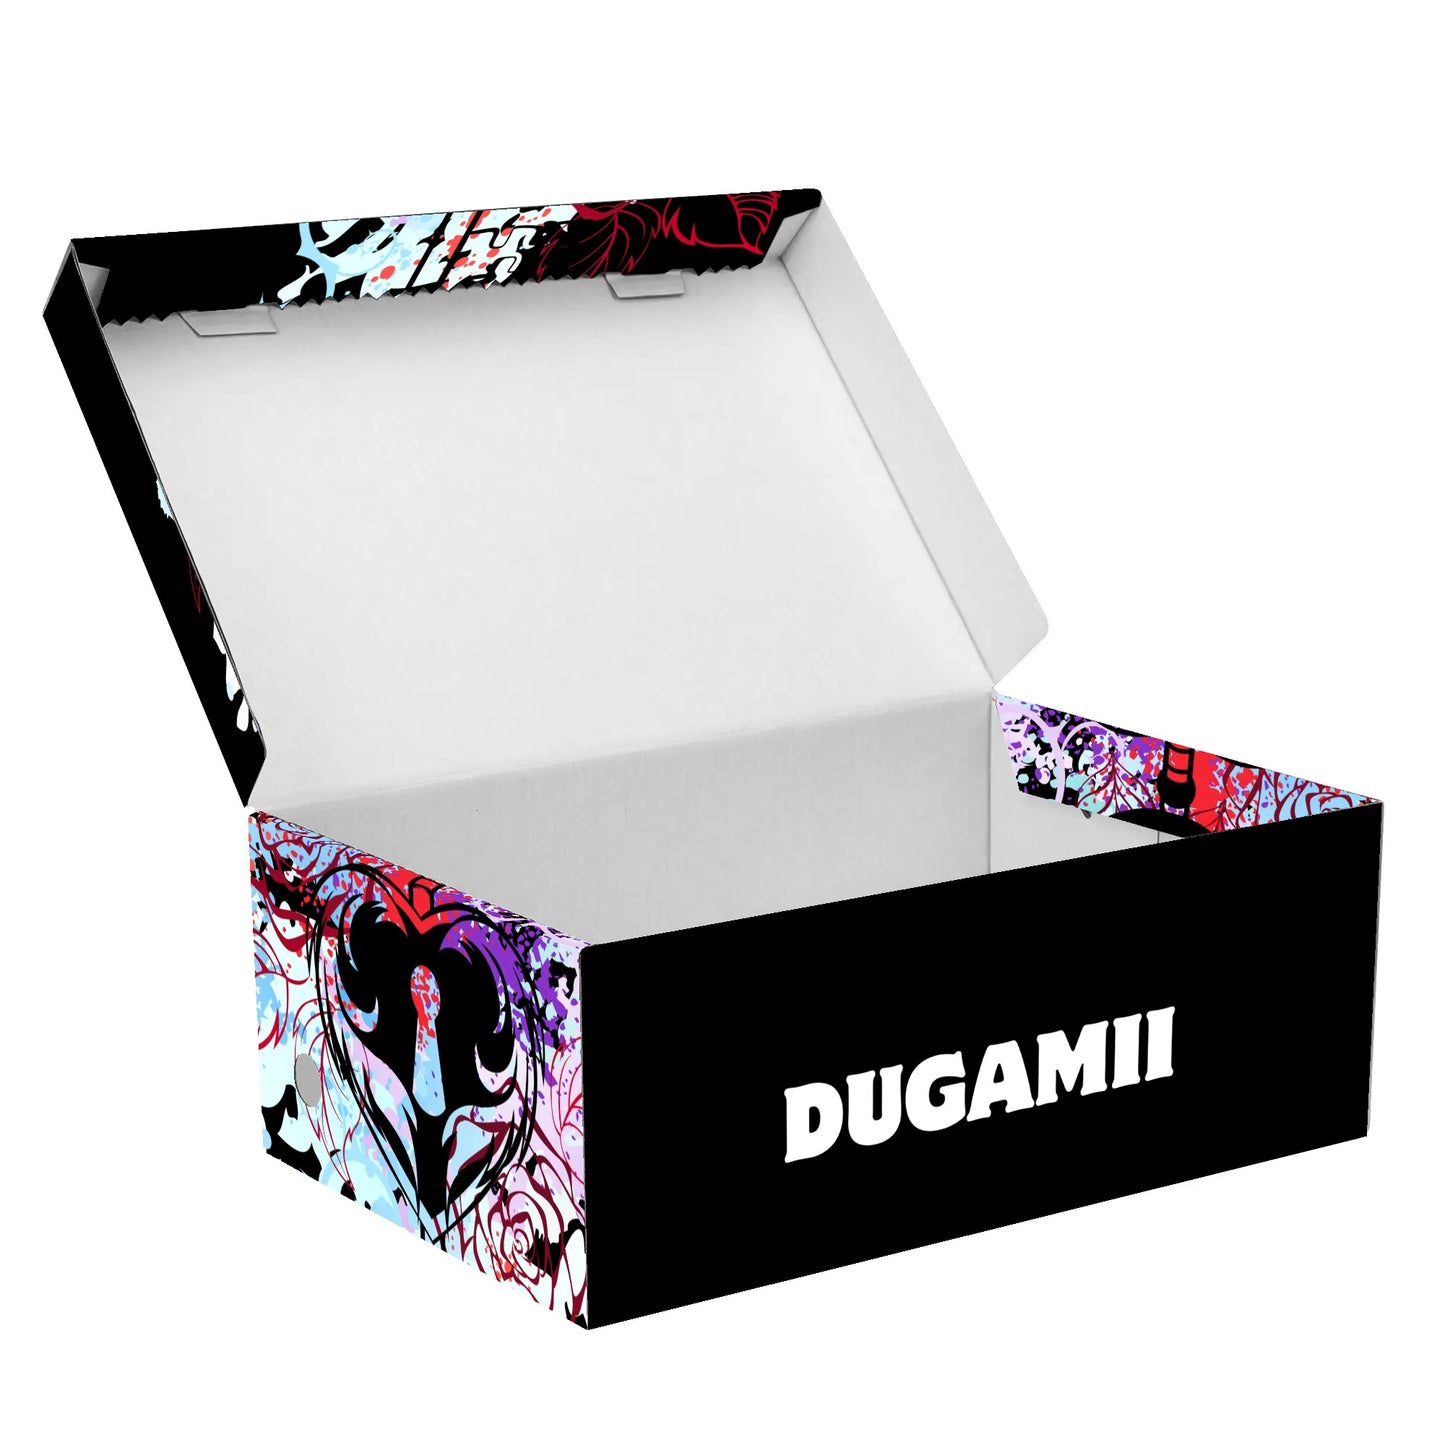 Men's White DuGamii Lock and Key "Limited Edition" Running Sneakers & Box